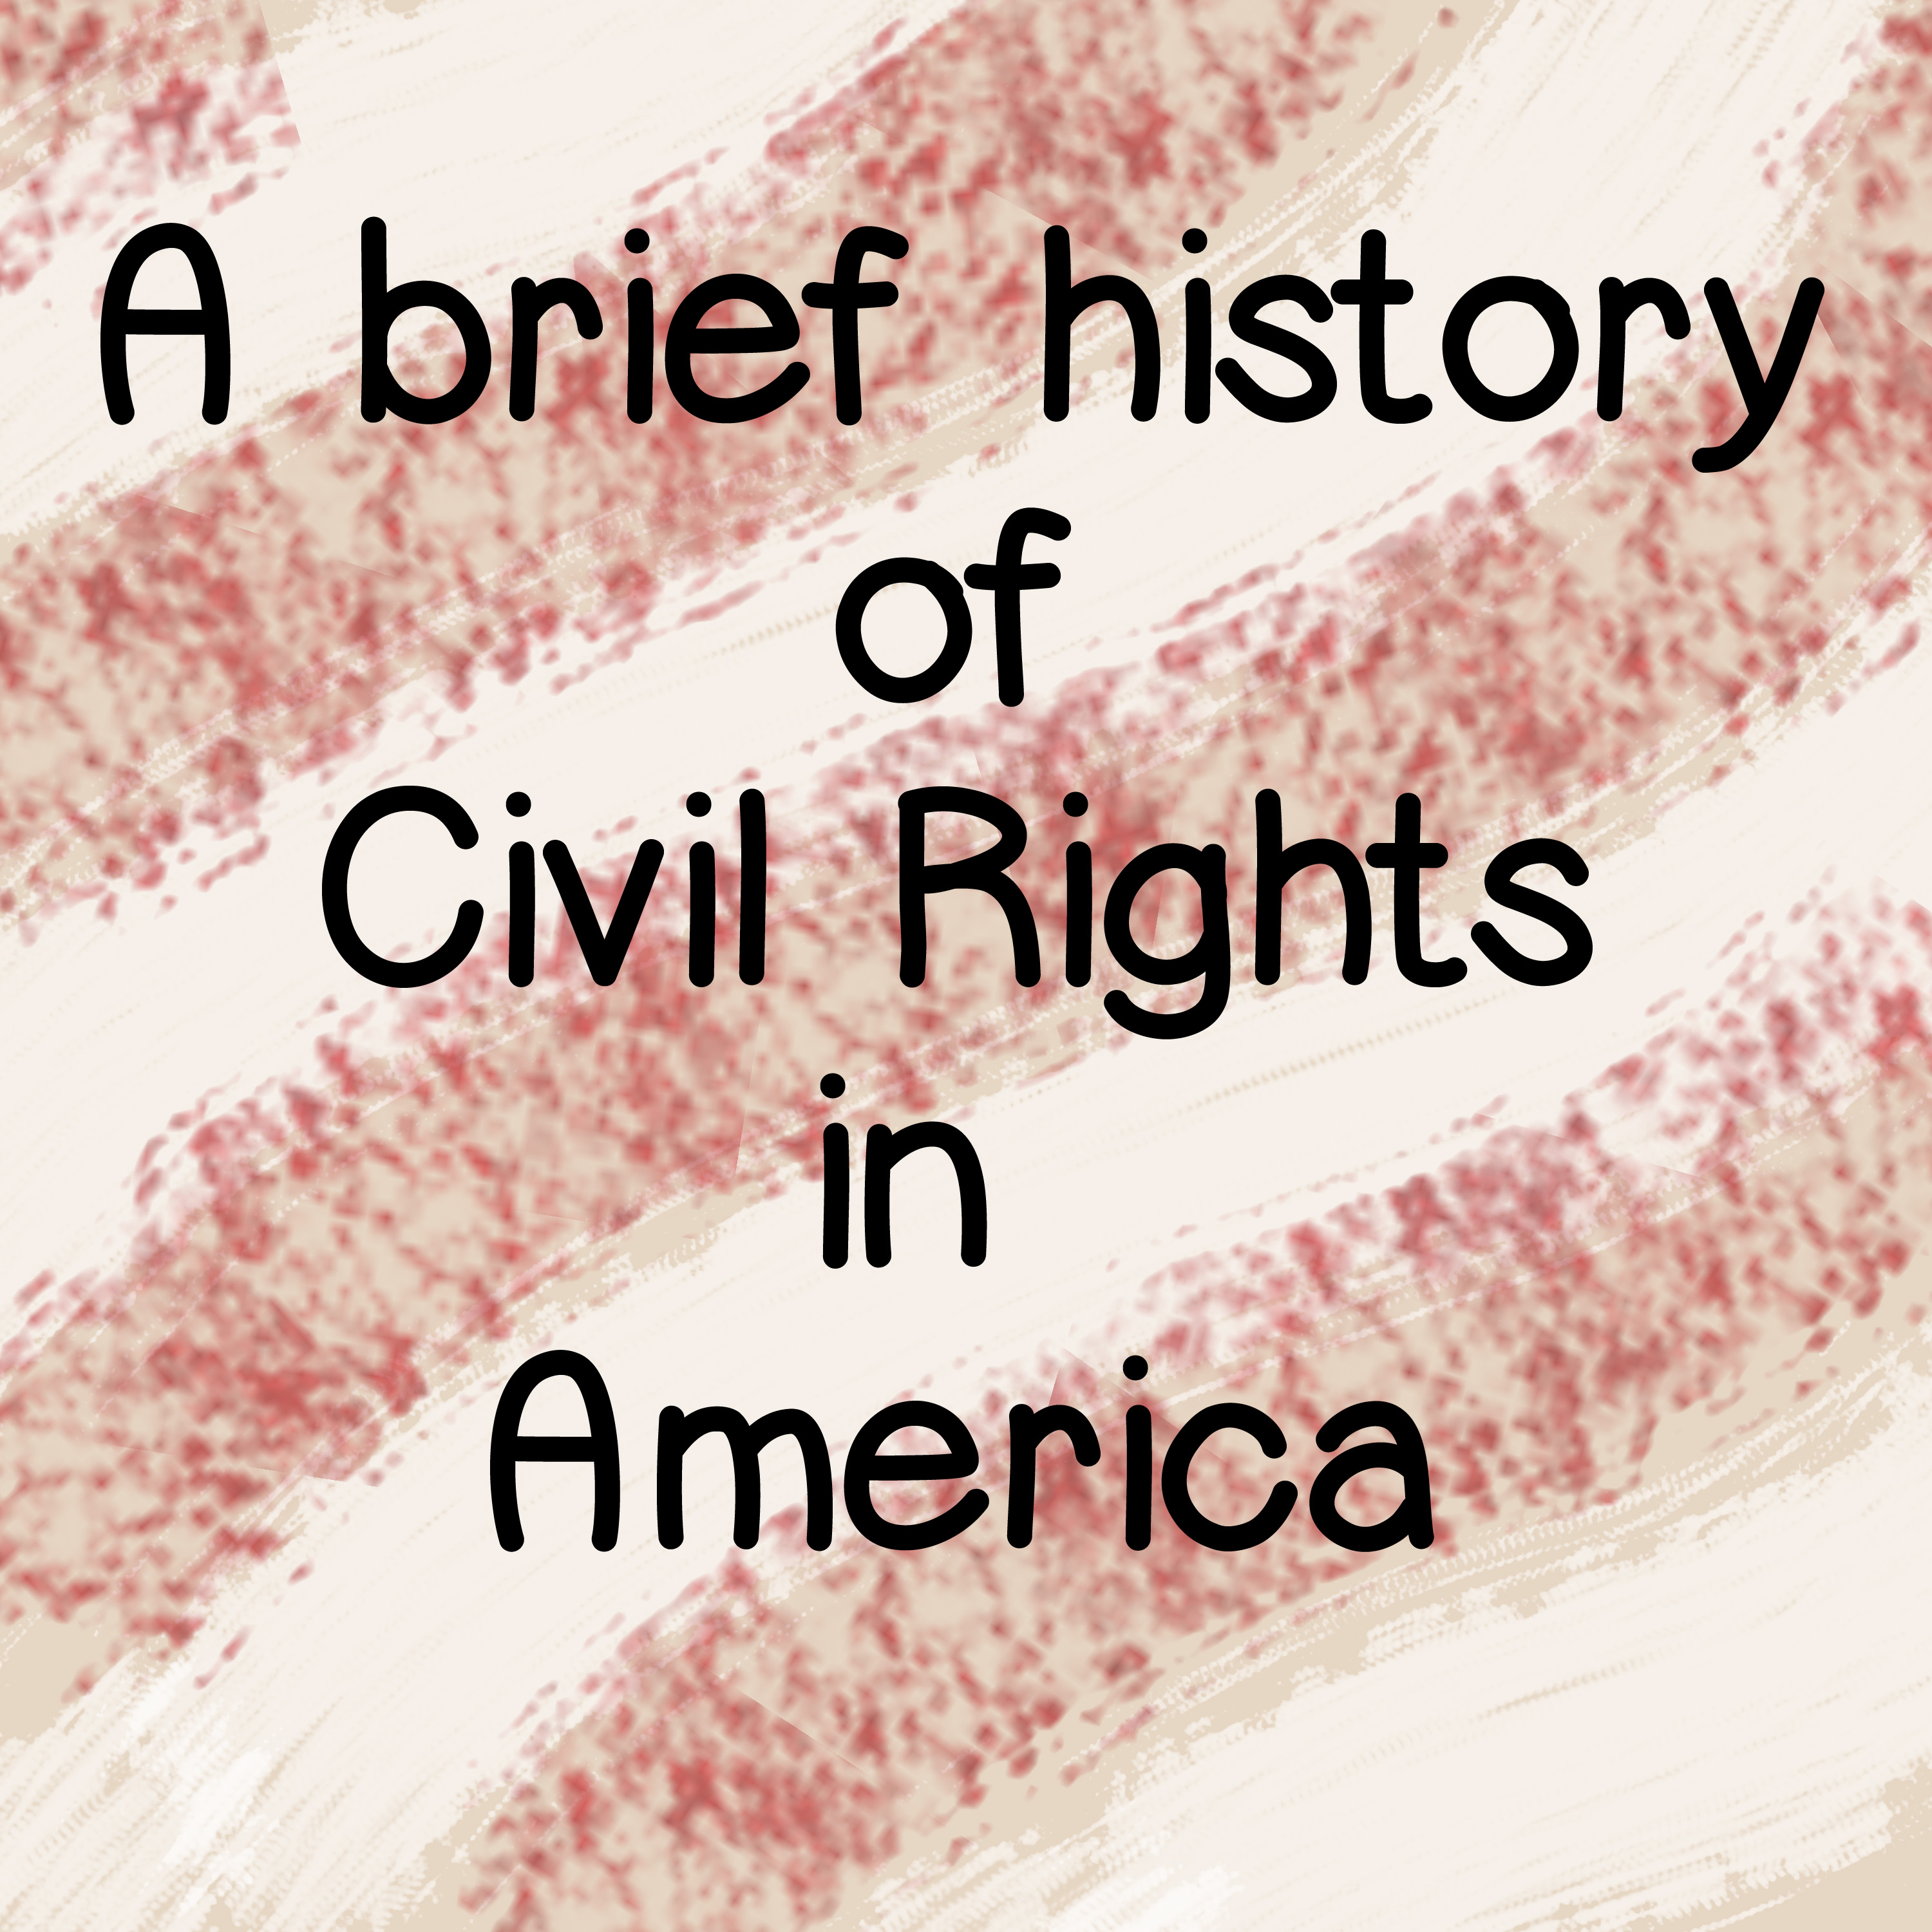 A brief history of Civil Rights in America